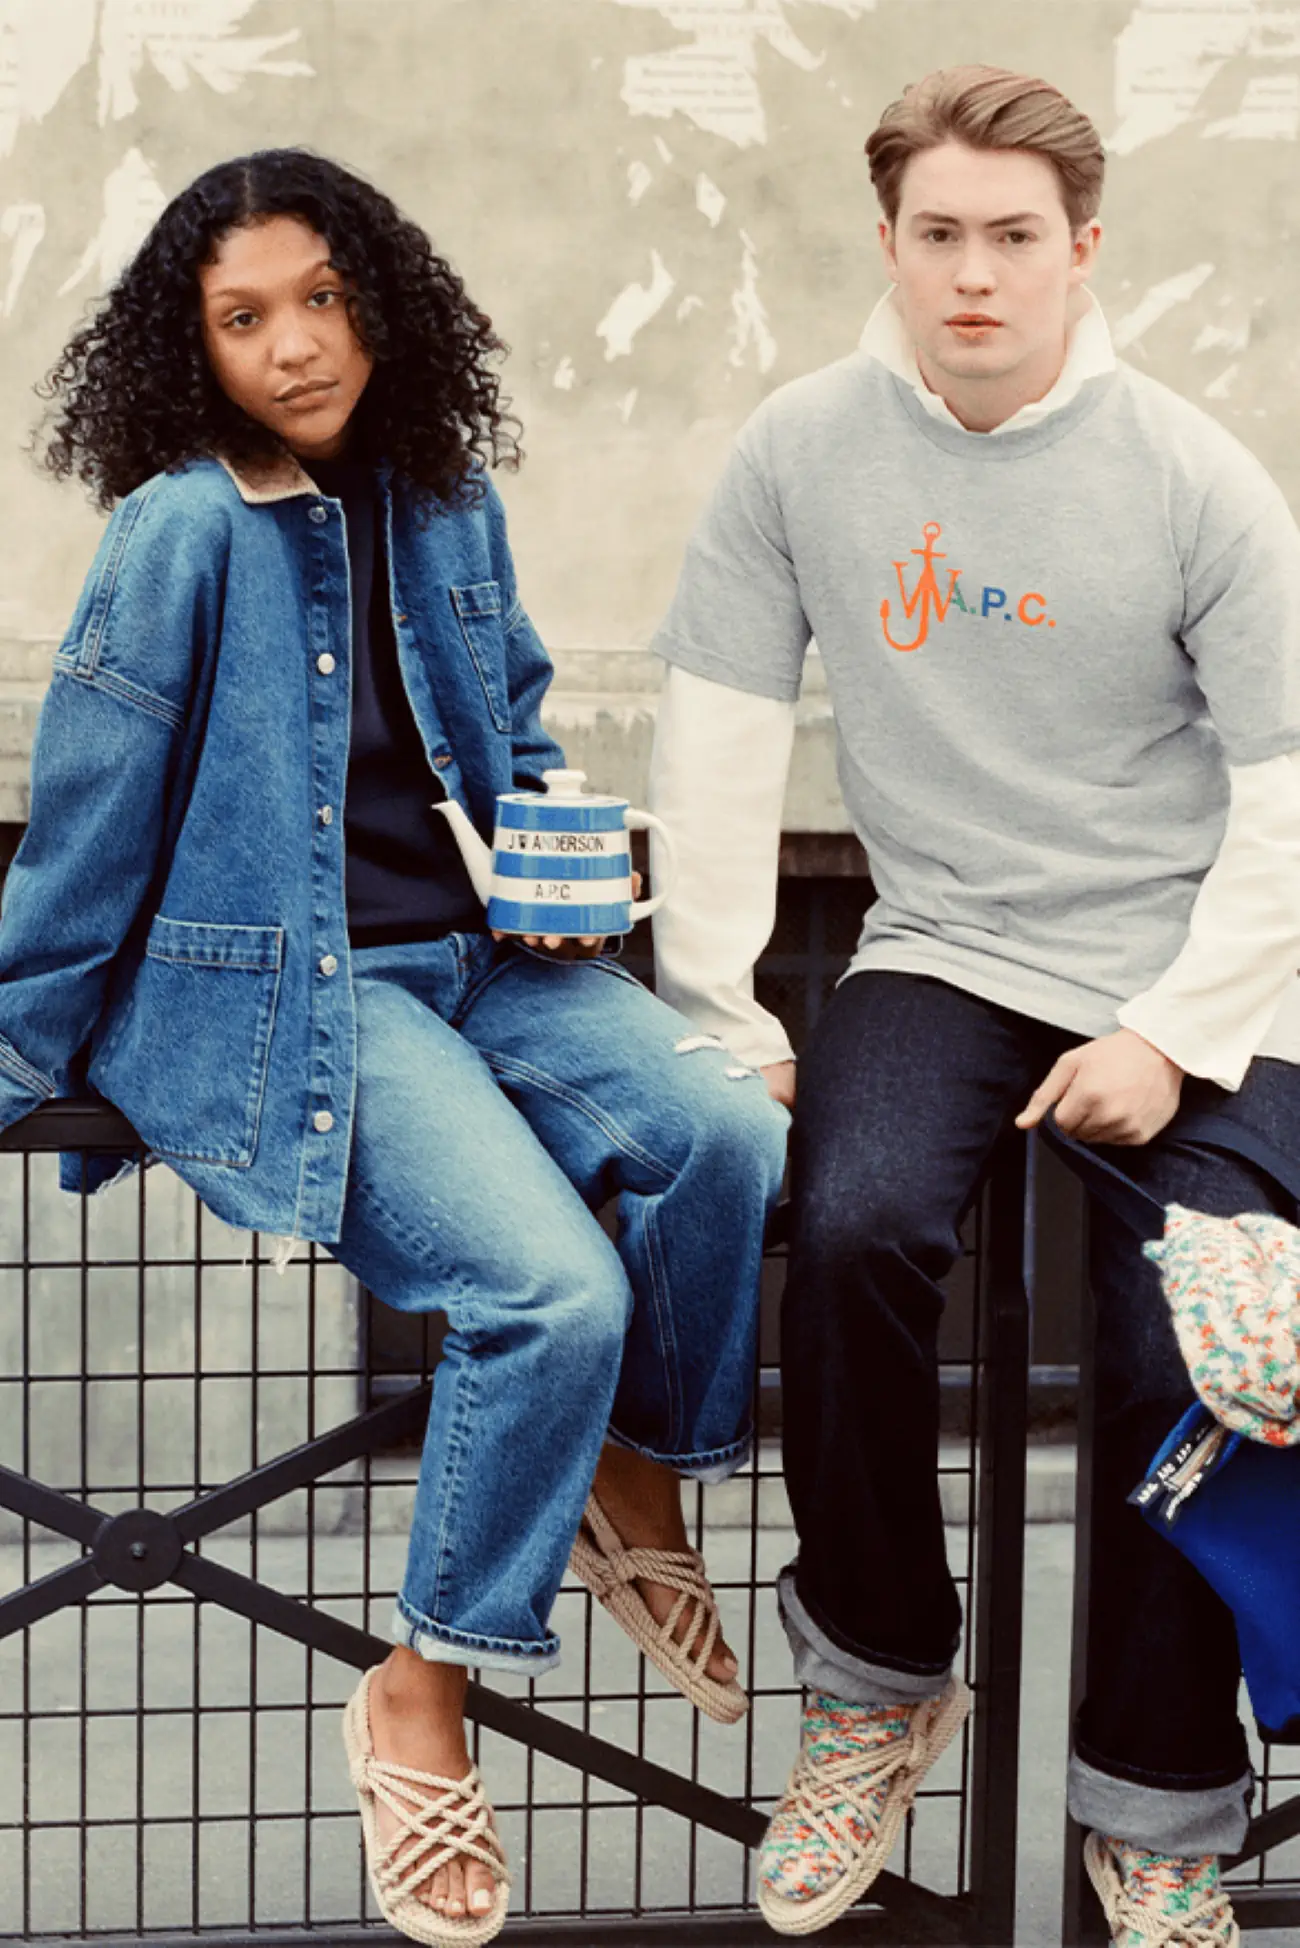 Joseph Beuys' spirit revived in JW Anderson x A.P.C. collaboration